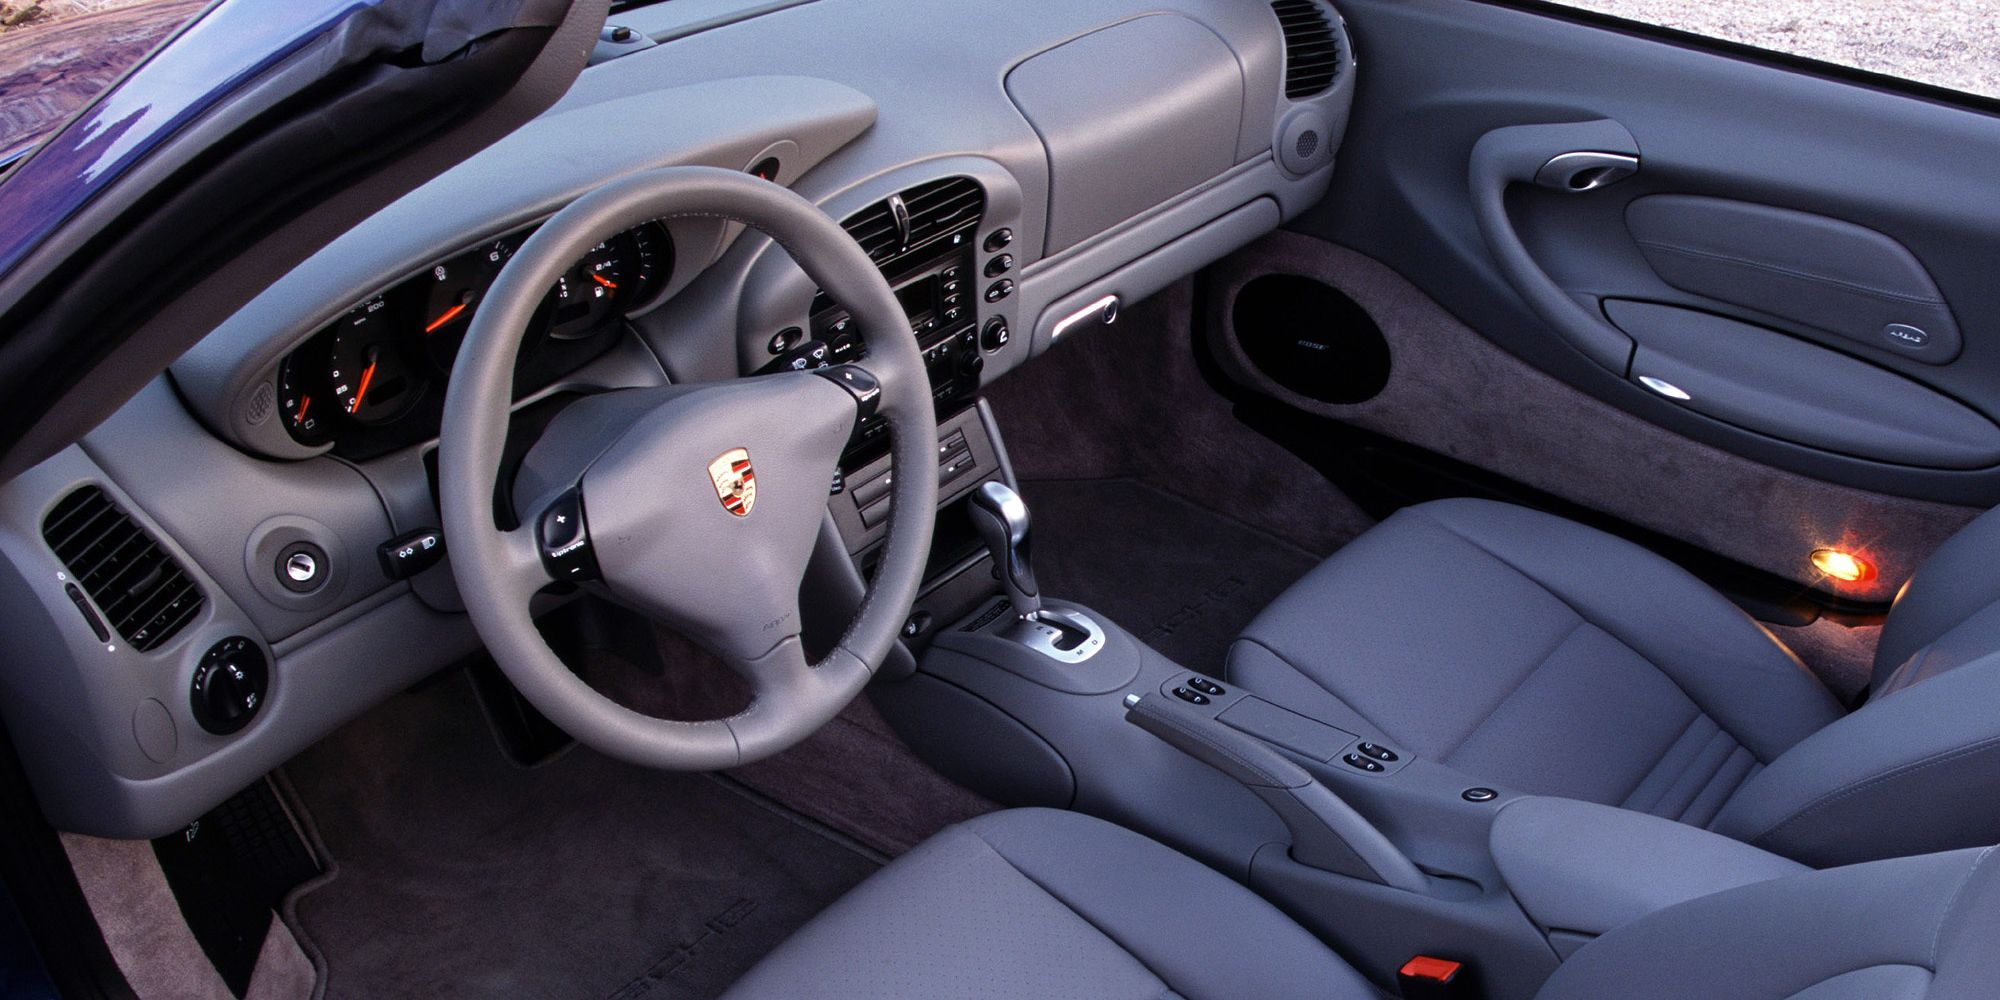 The interior of the C4S, from the driver's seat